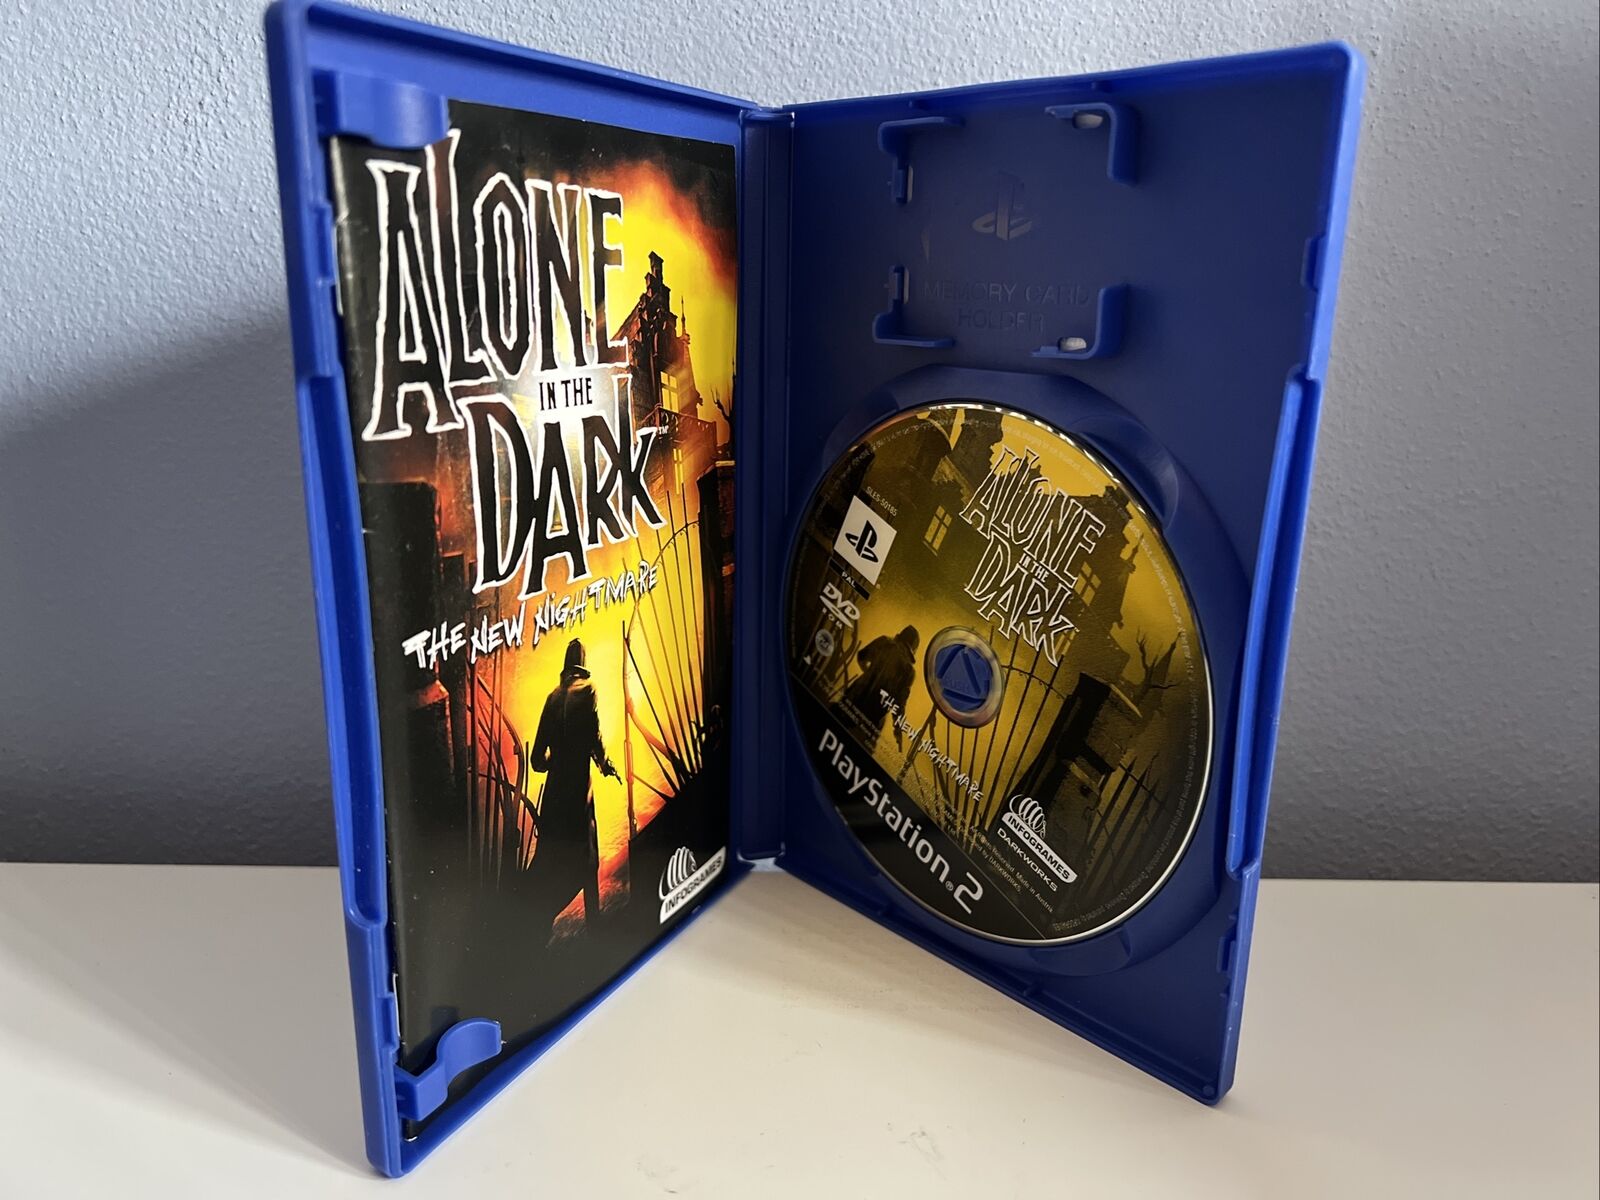 Ps2-videogame-Alone-In-The-Dark-Pal-144297706356-4